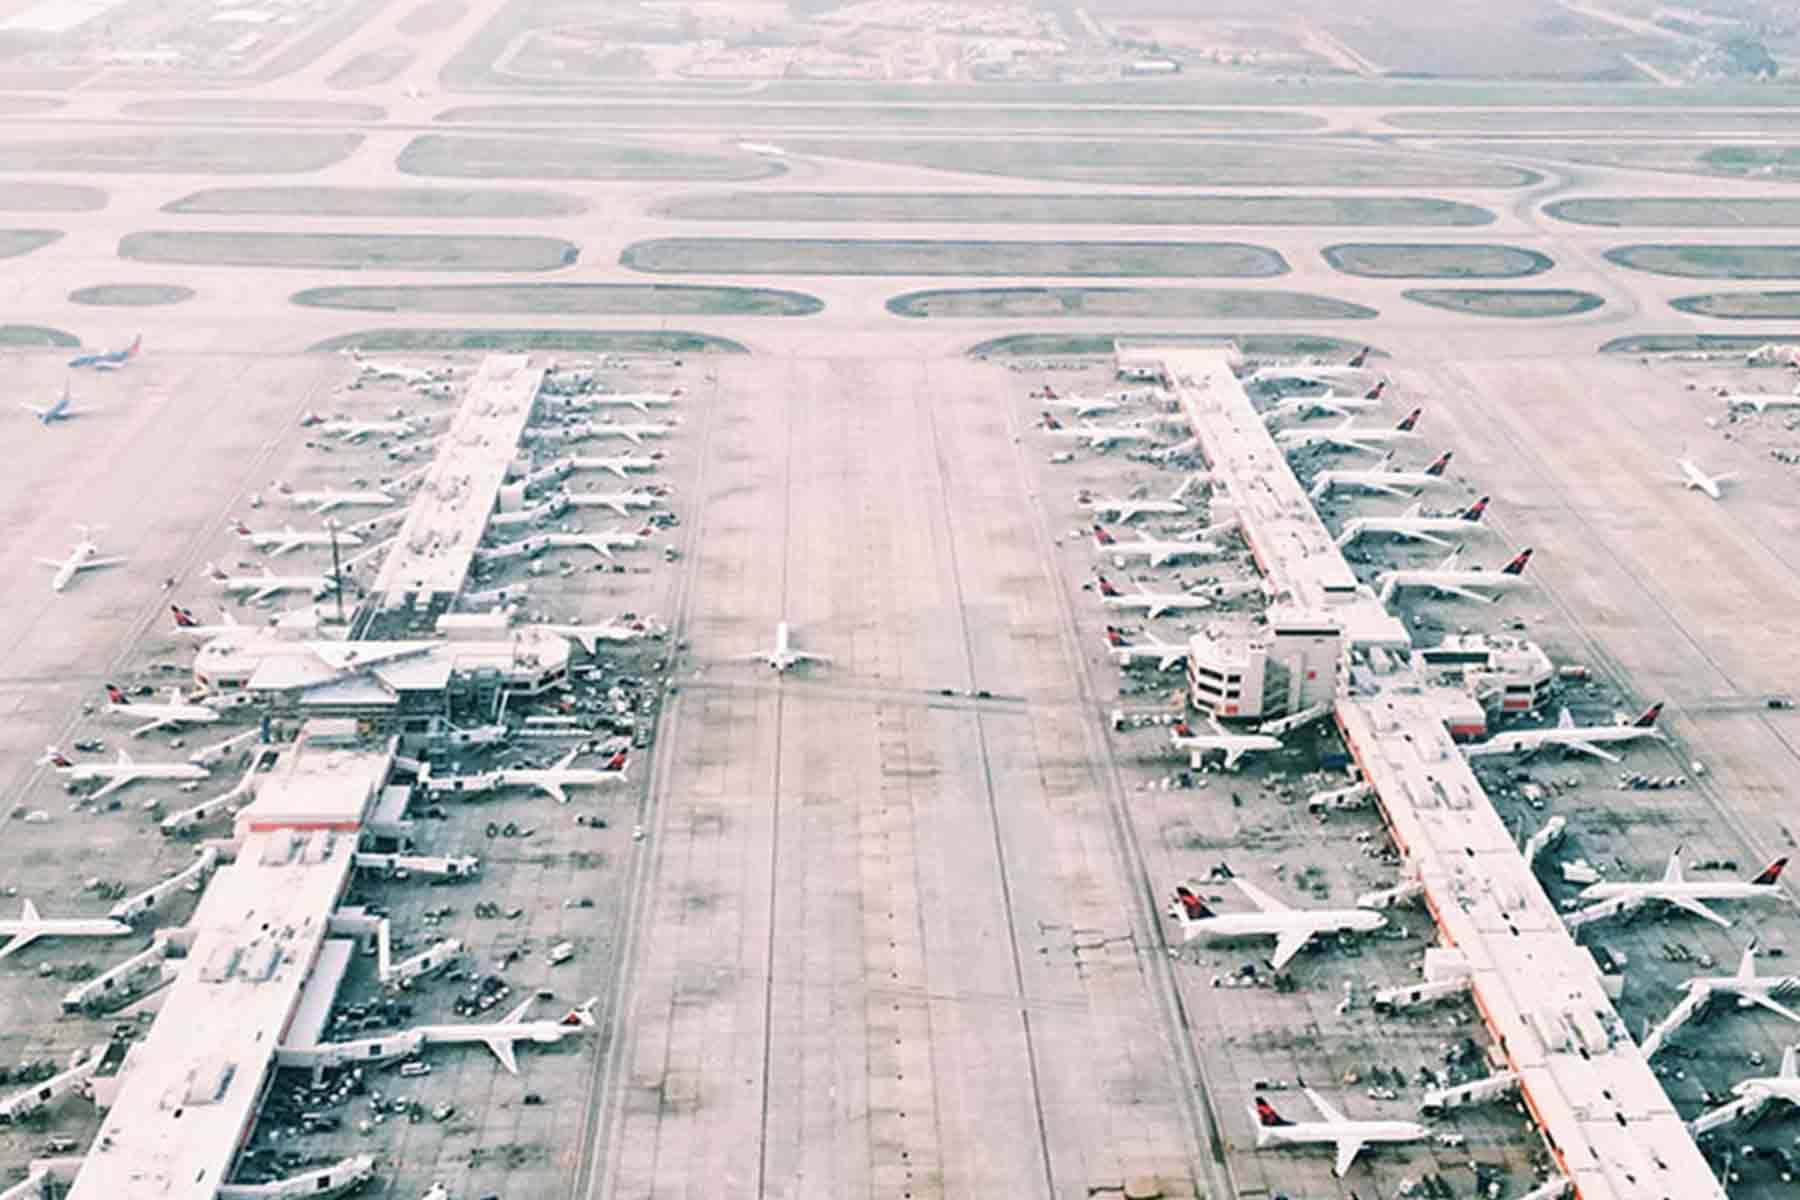 Rows of planes parked on airport tarmac